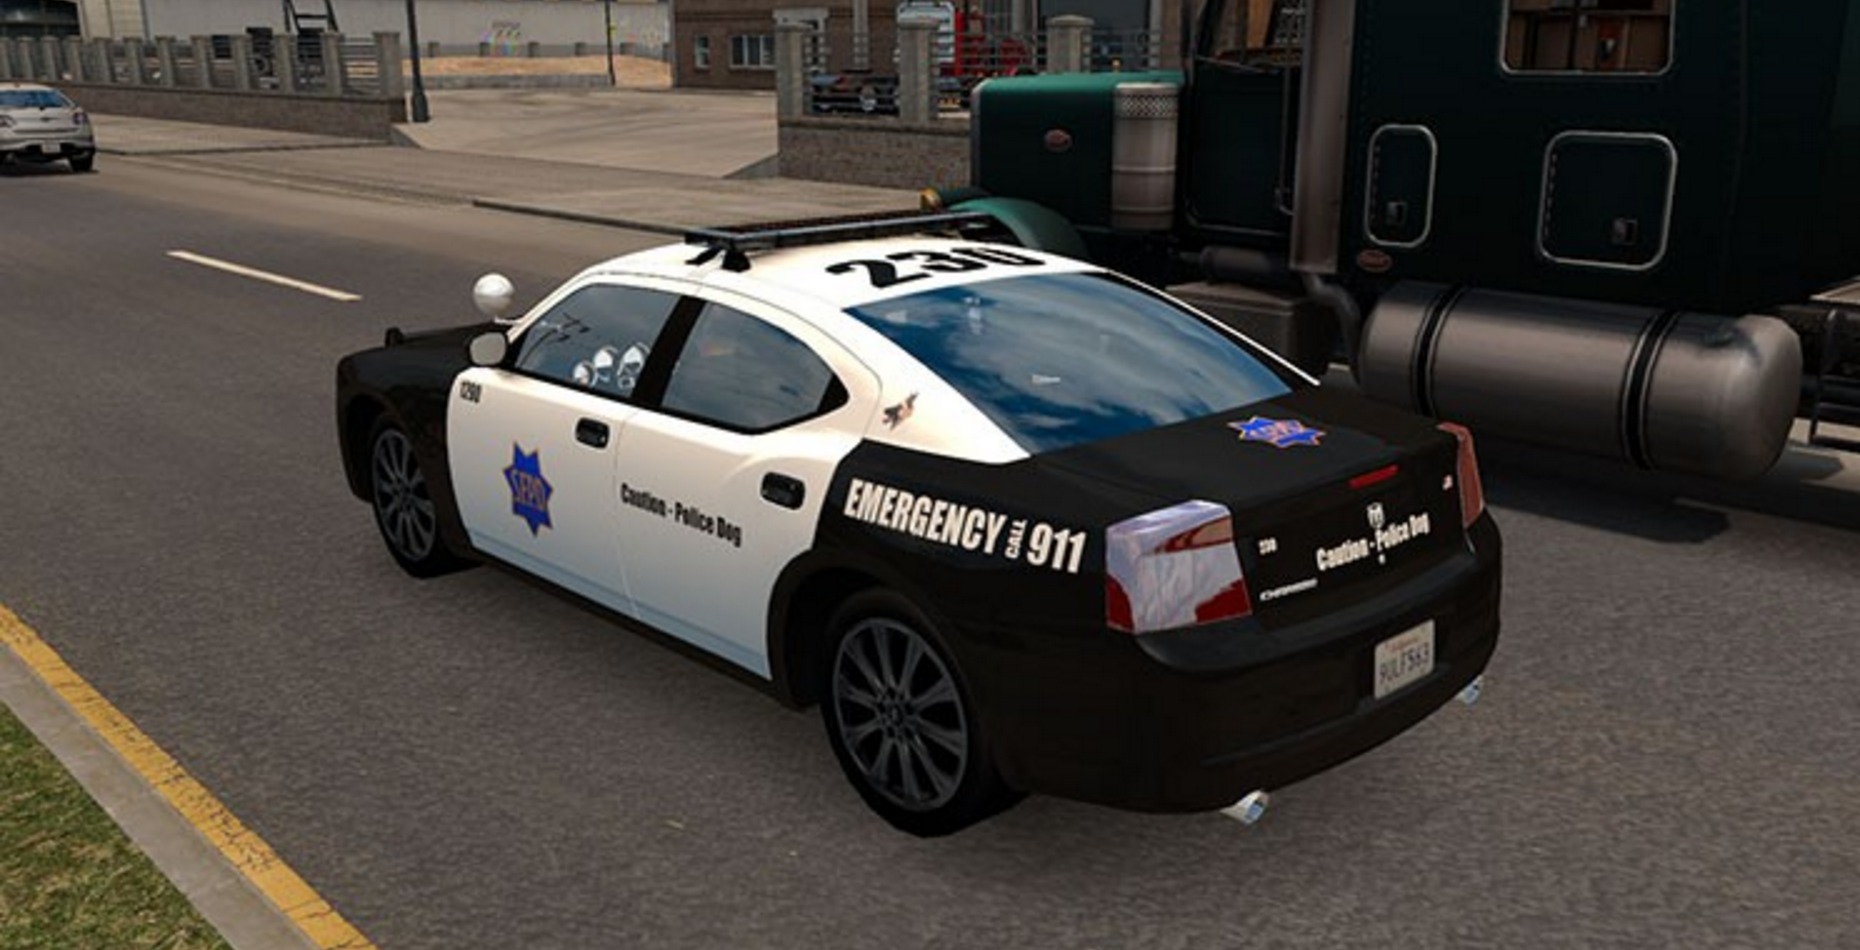 ai-police-dodge-charger-for-ats.jpeg